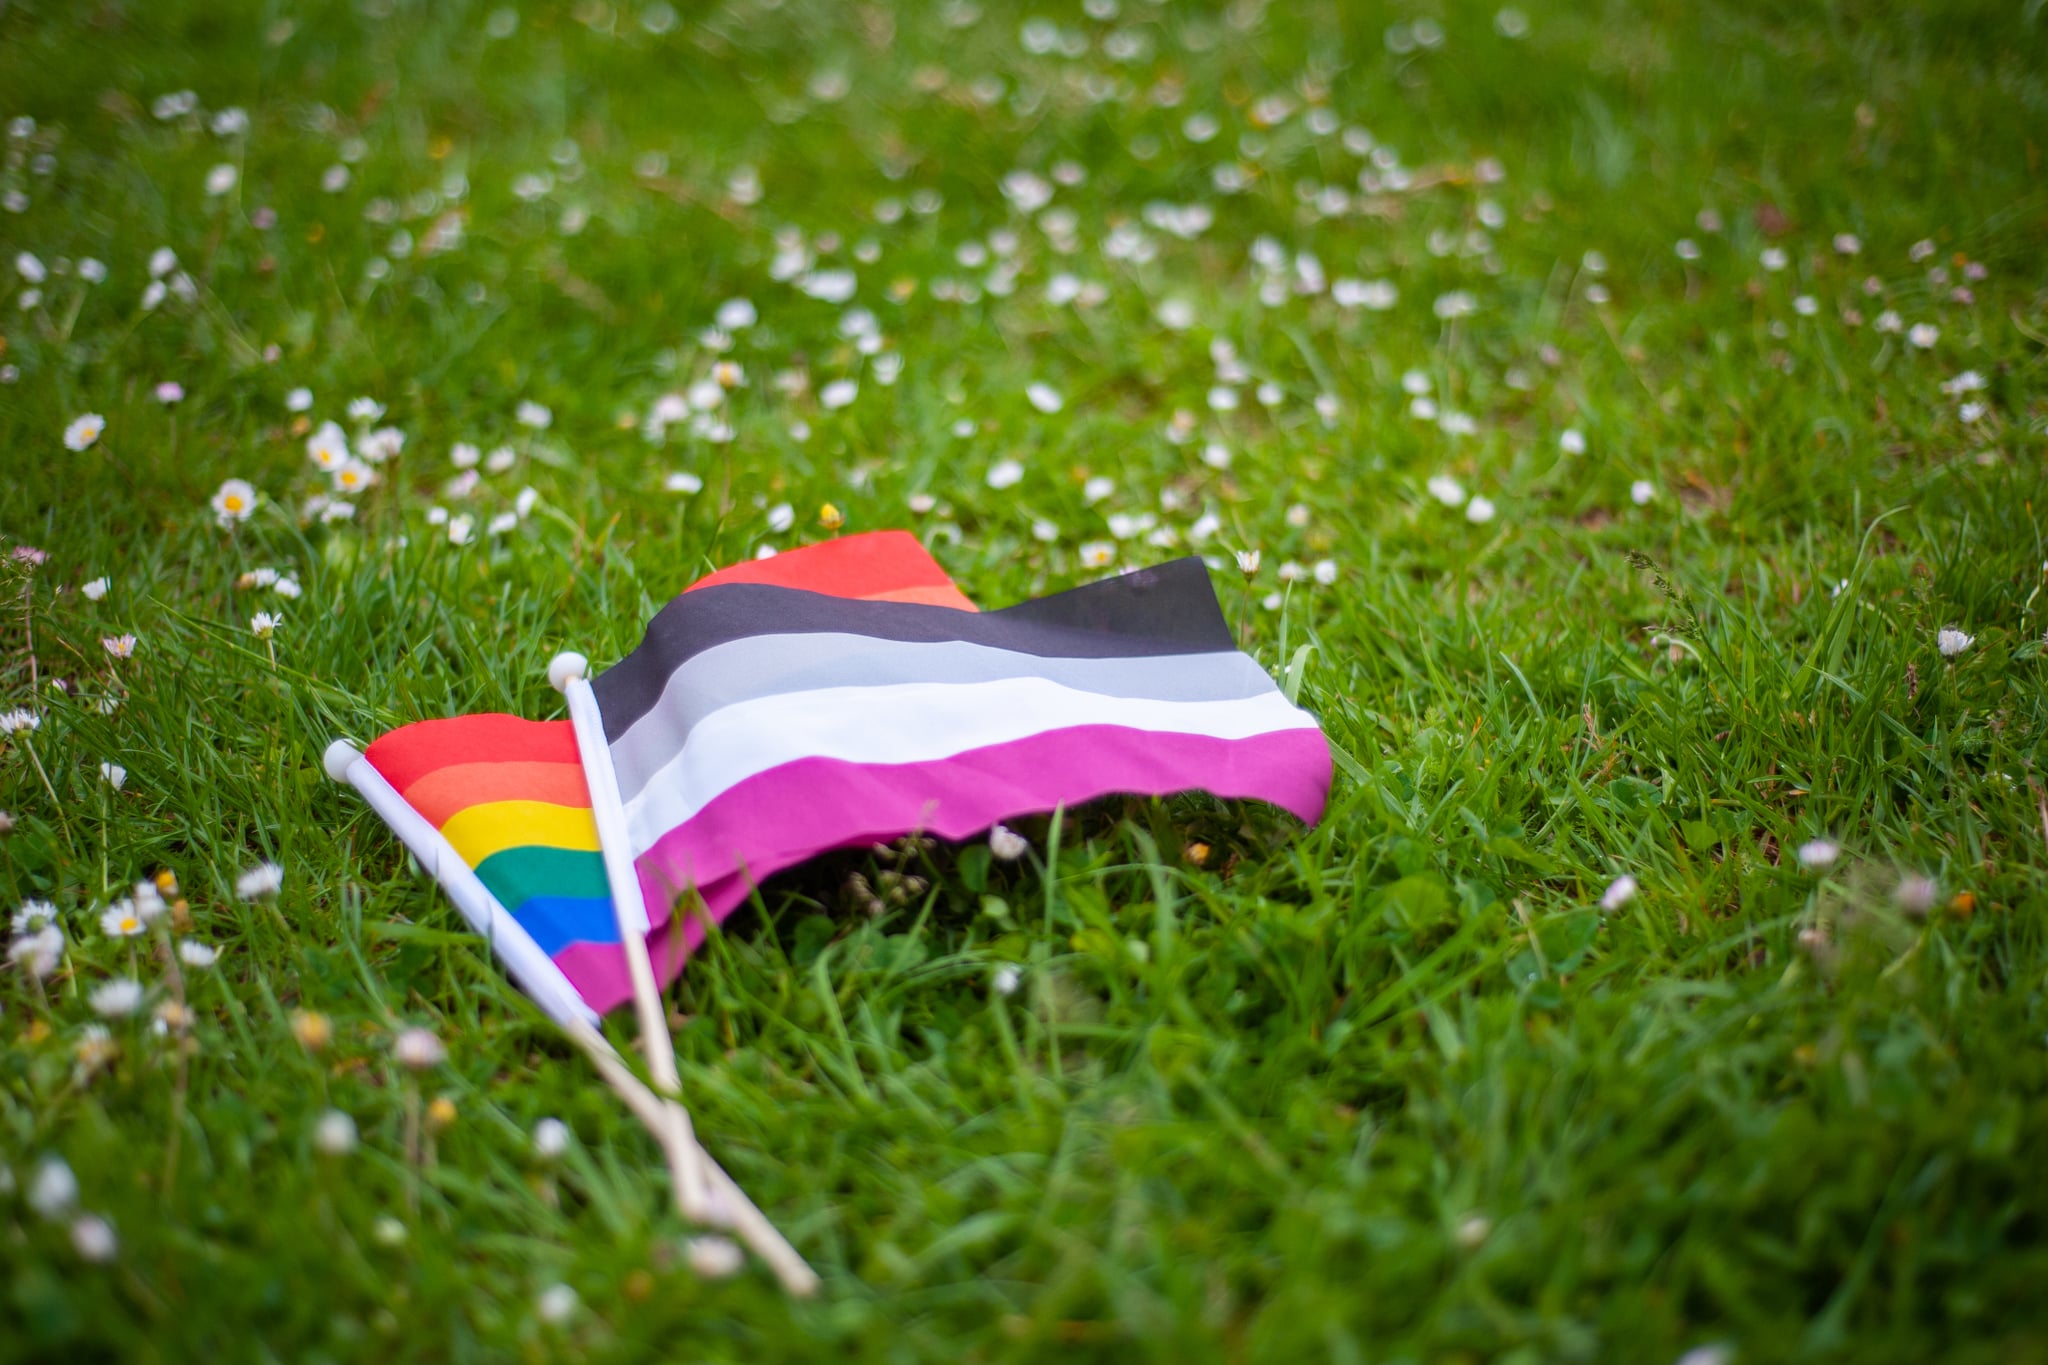 The rainbow LGBTQIA pride flag and the asexual pride flag together, lying in the grass intertwined.